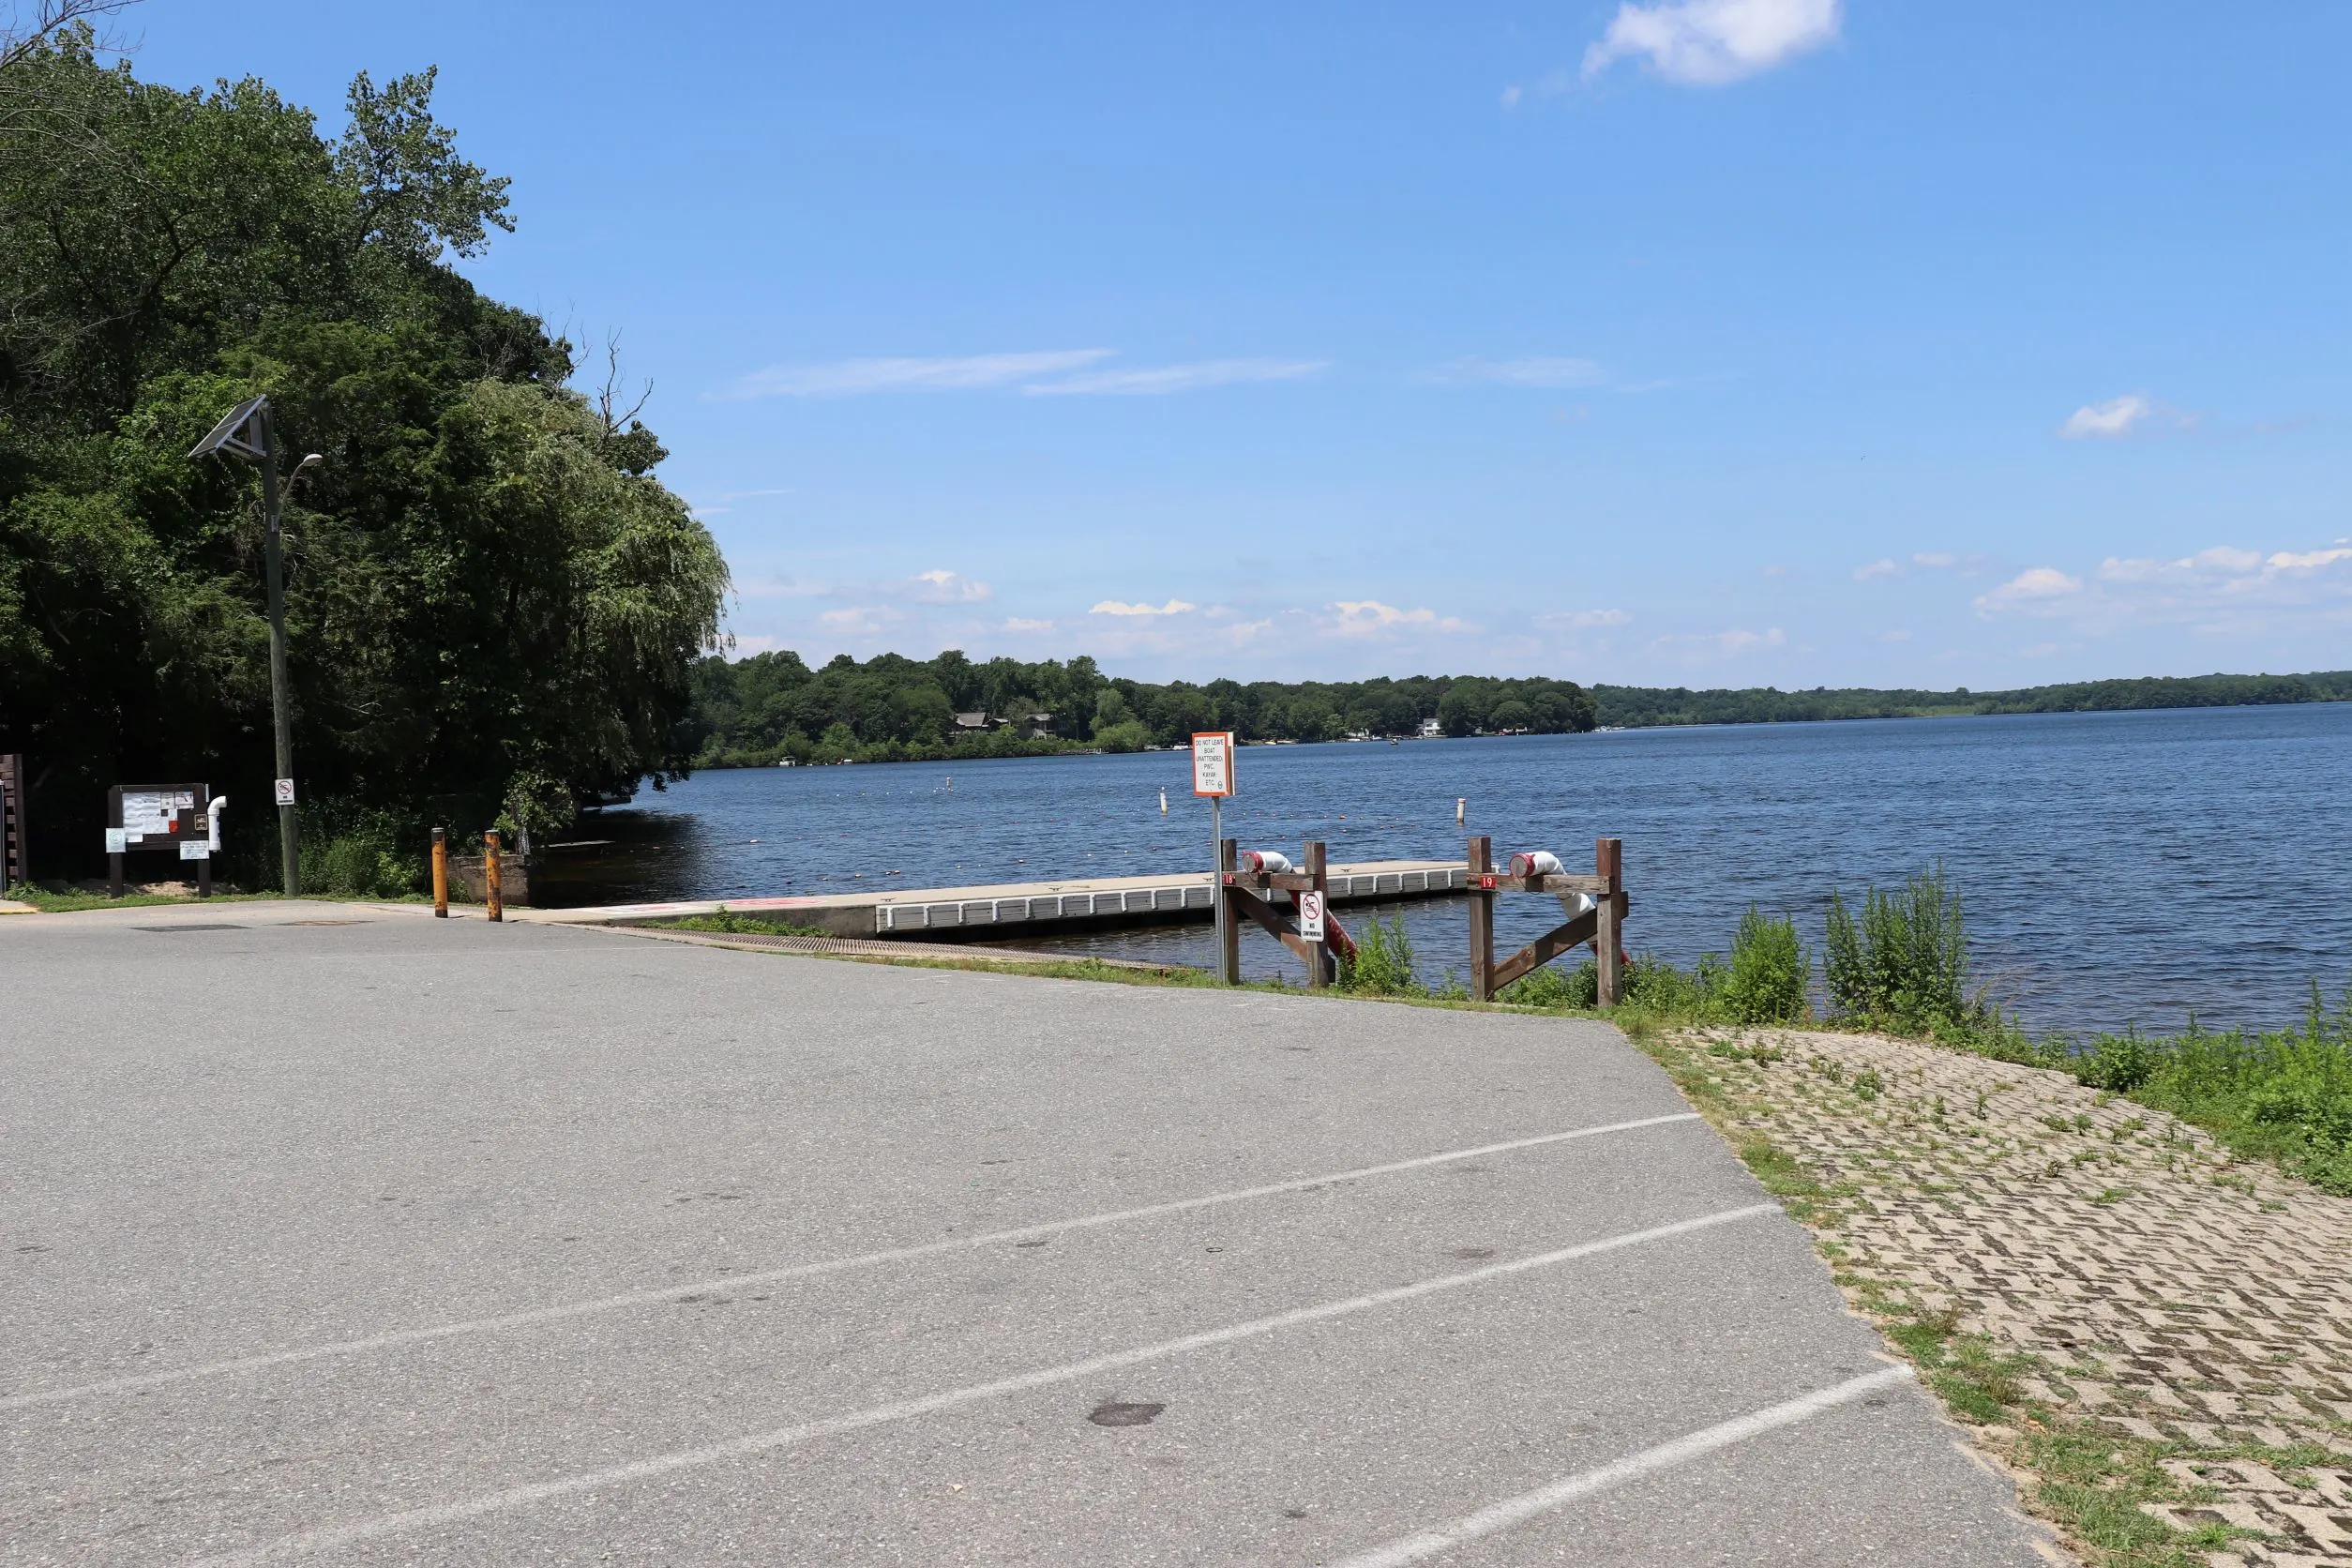 image of boat launch and dock at gardner lake in salem ct.